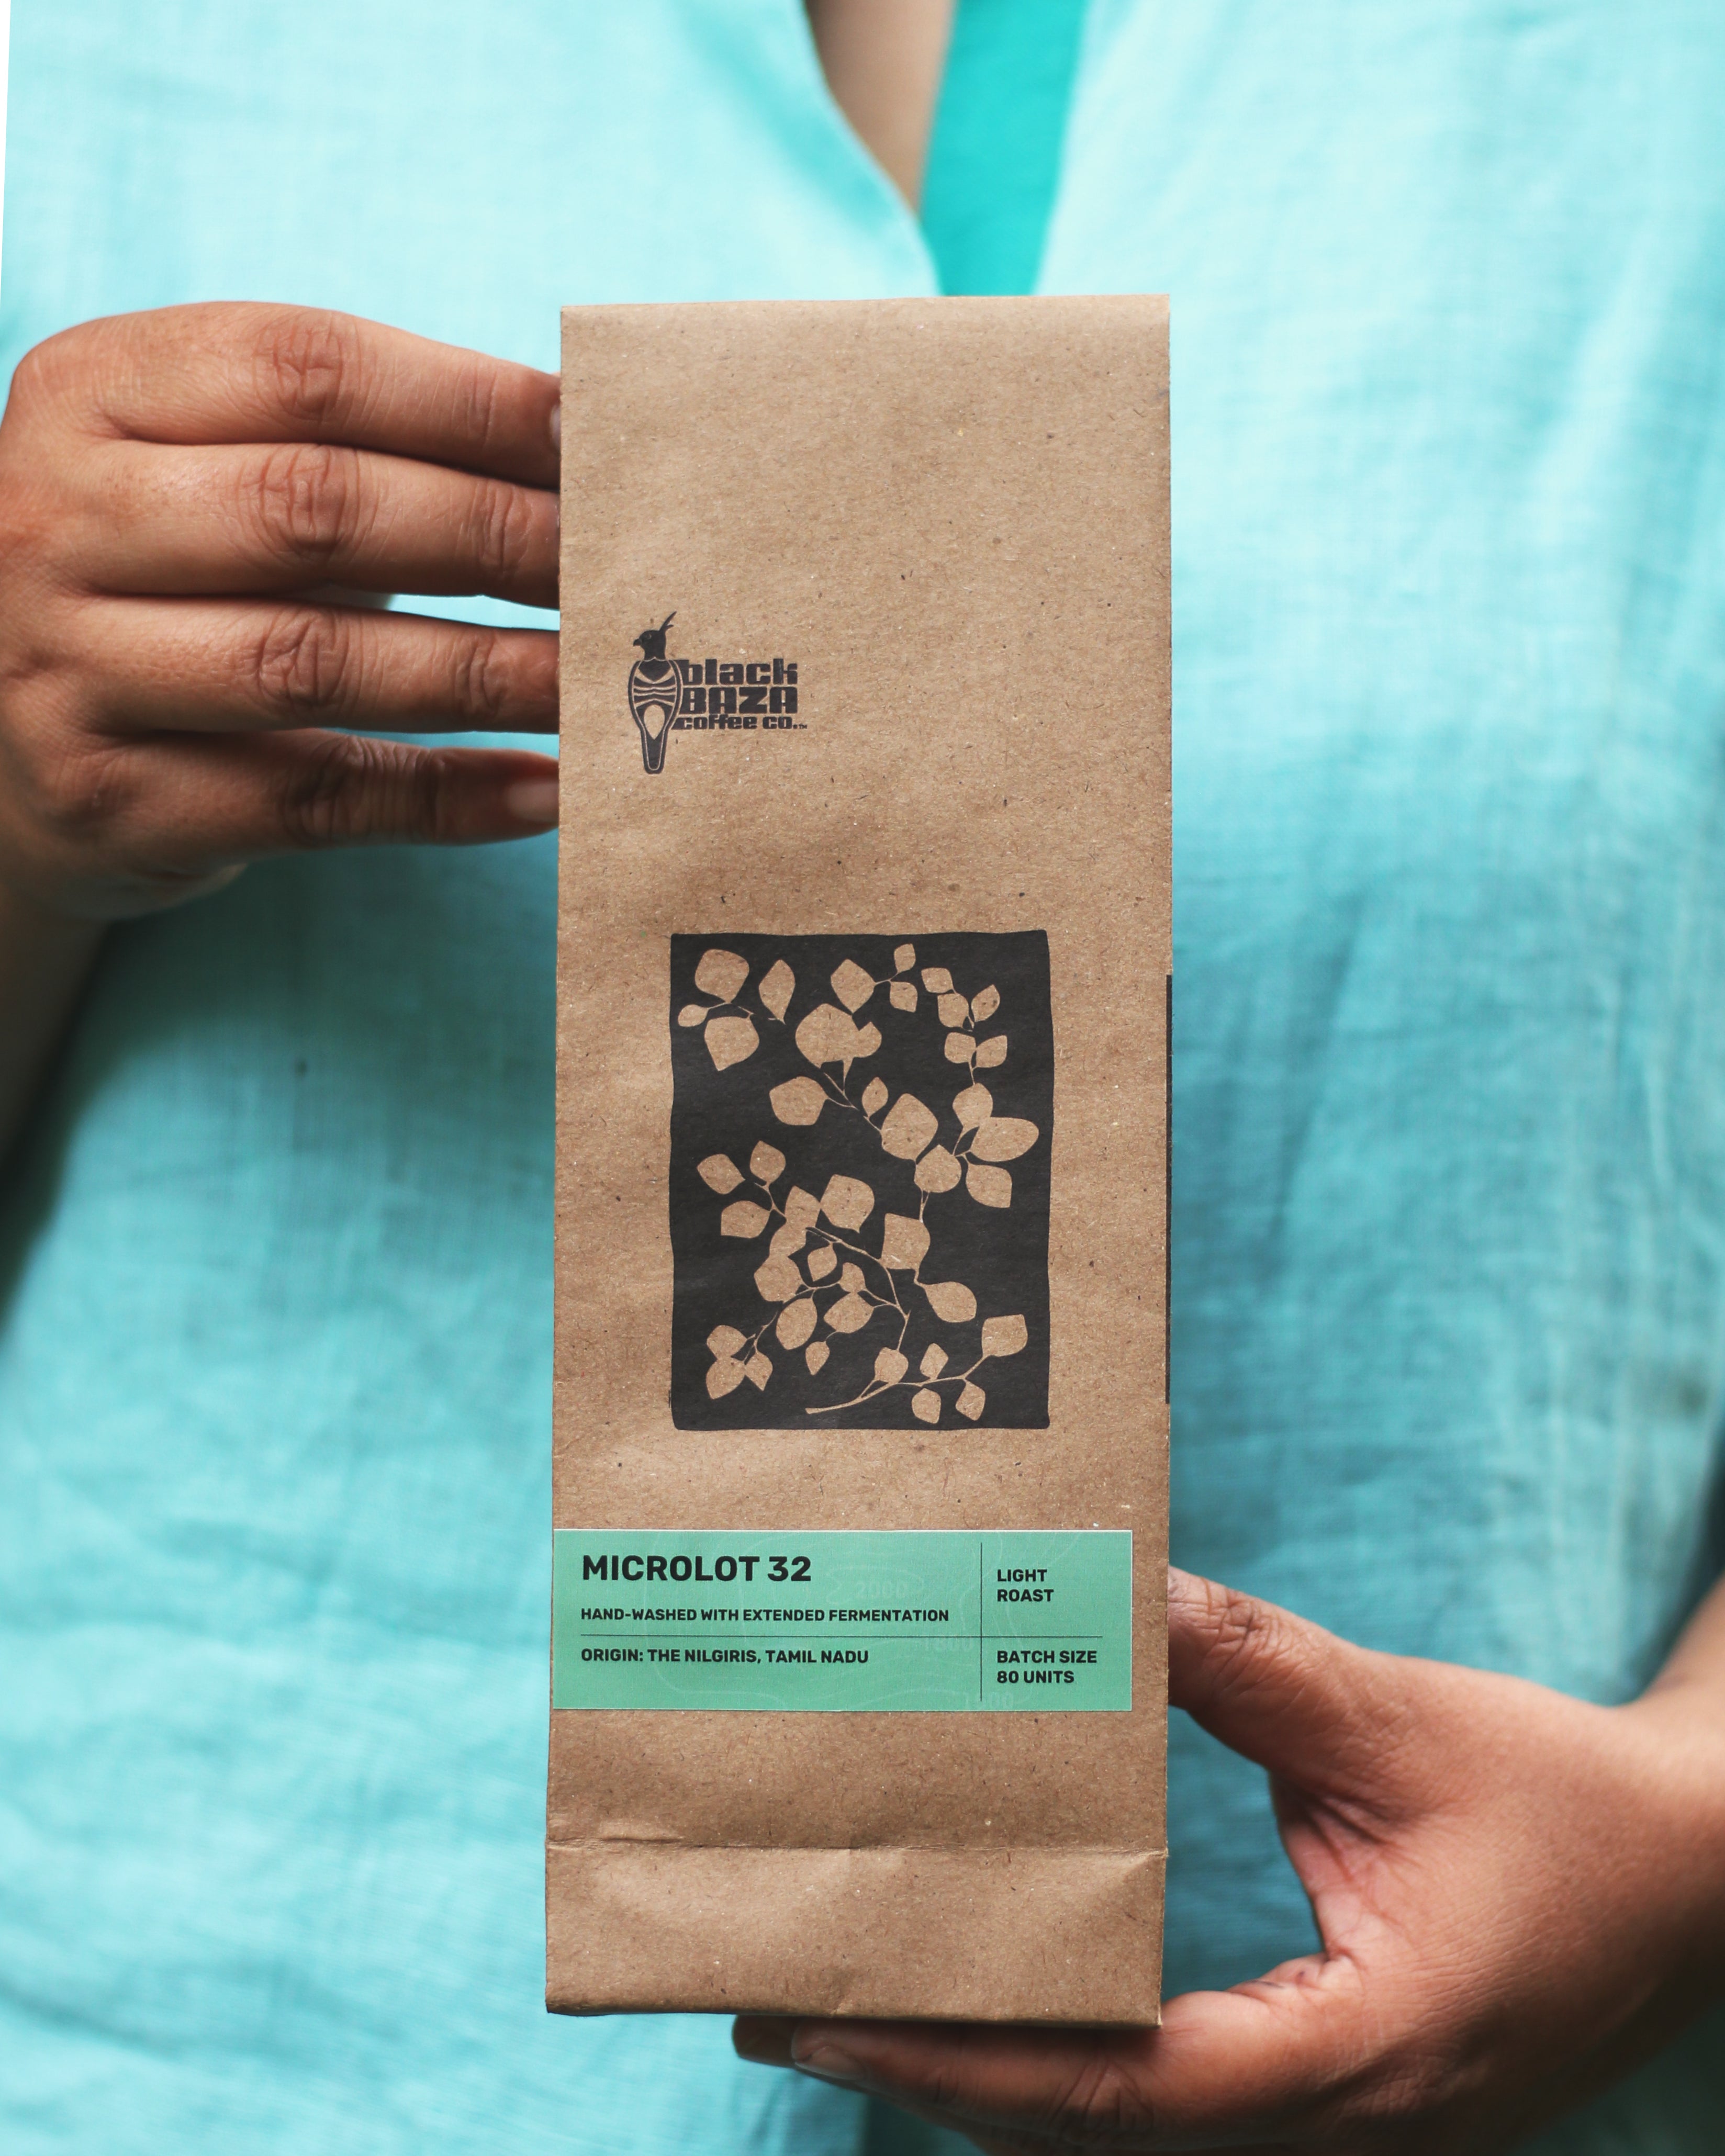 Black Baza Coffee Co. - Microlot 32 | Hand-Washed with Extended Fermentation product image